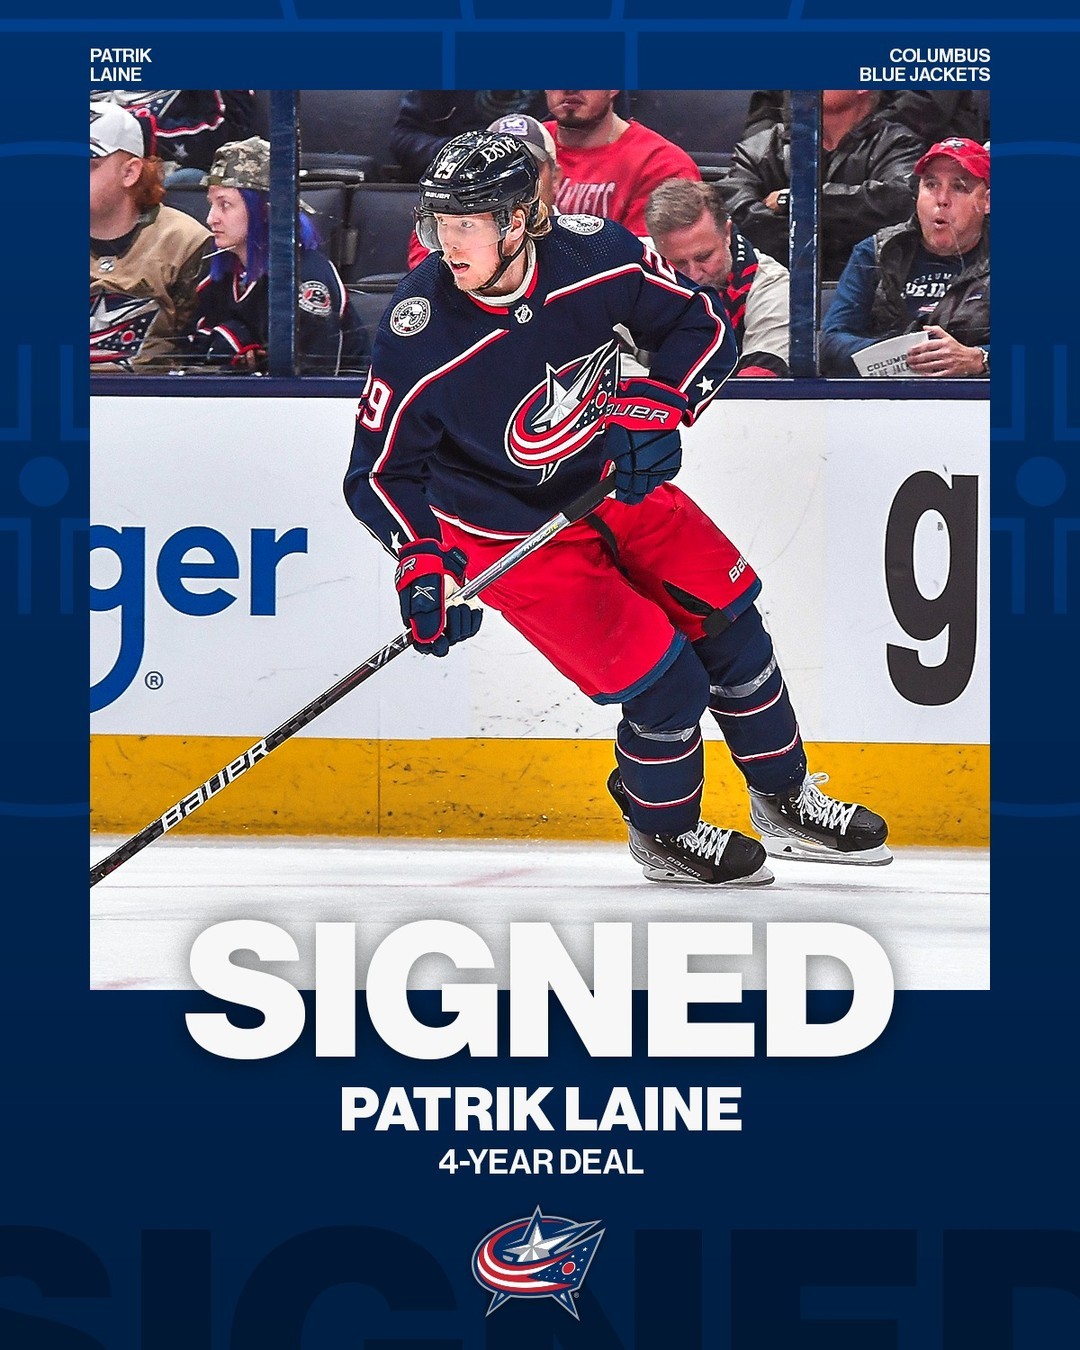 The @bluejacketsnhl have signed @patriklaine to a 4-year contract!  #NHLFreeAgen...